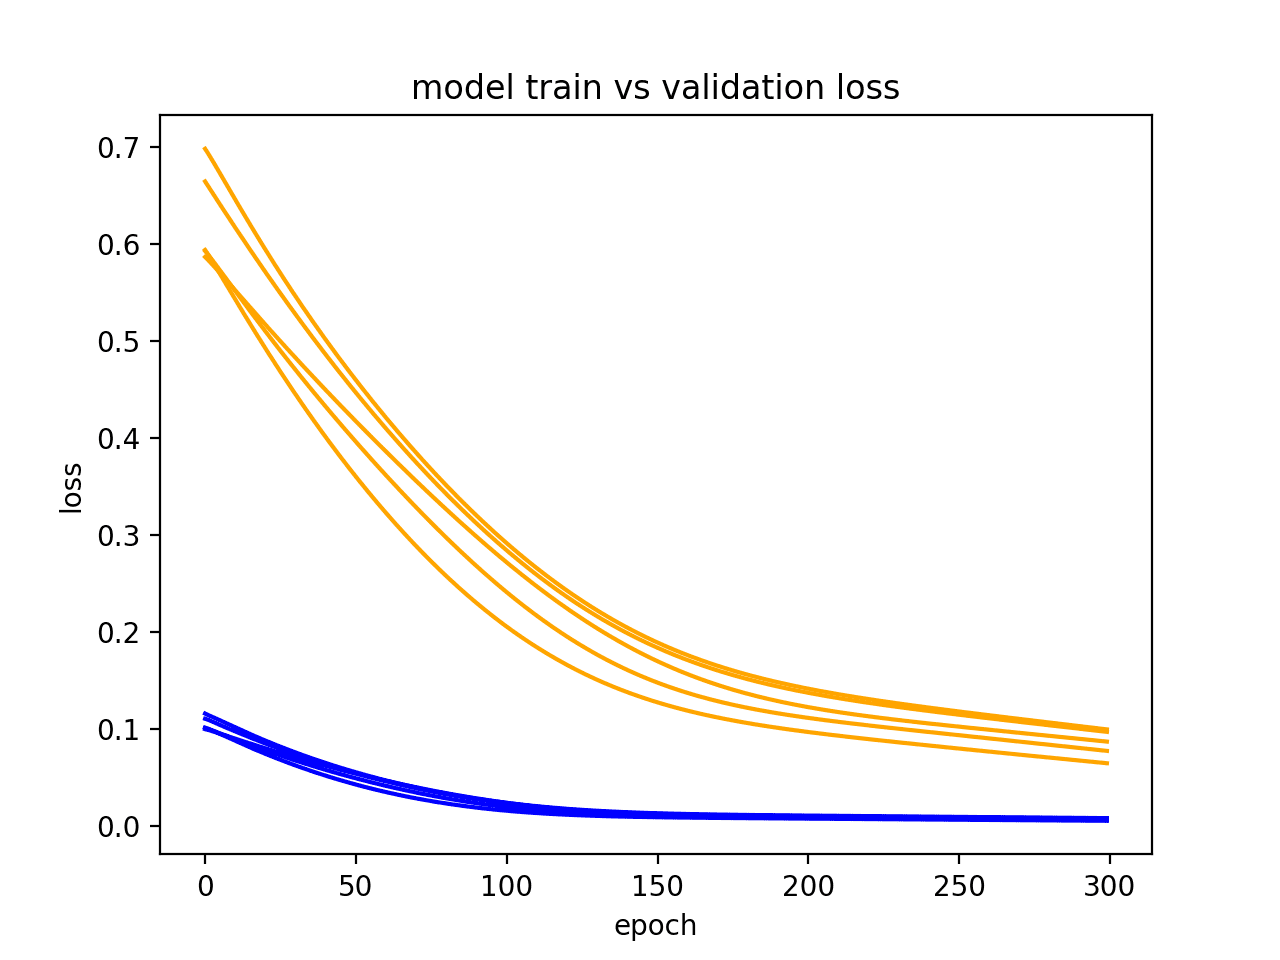 How to Diagnose Overfitting and Underfitting of LSTM Models